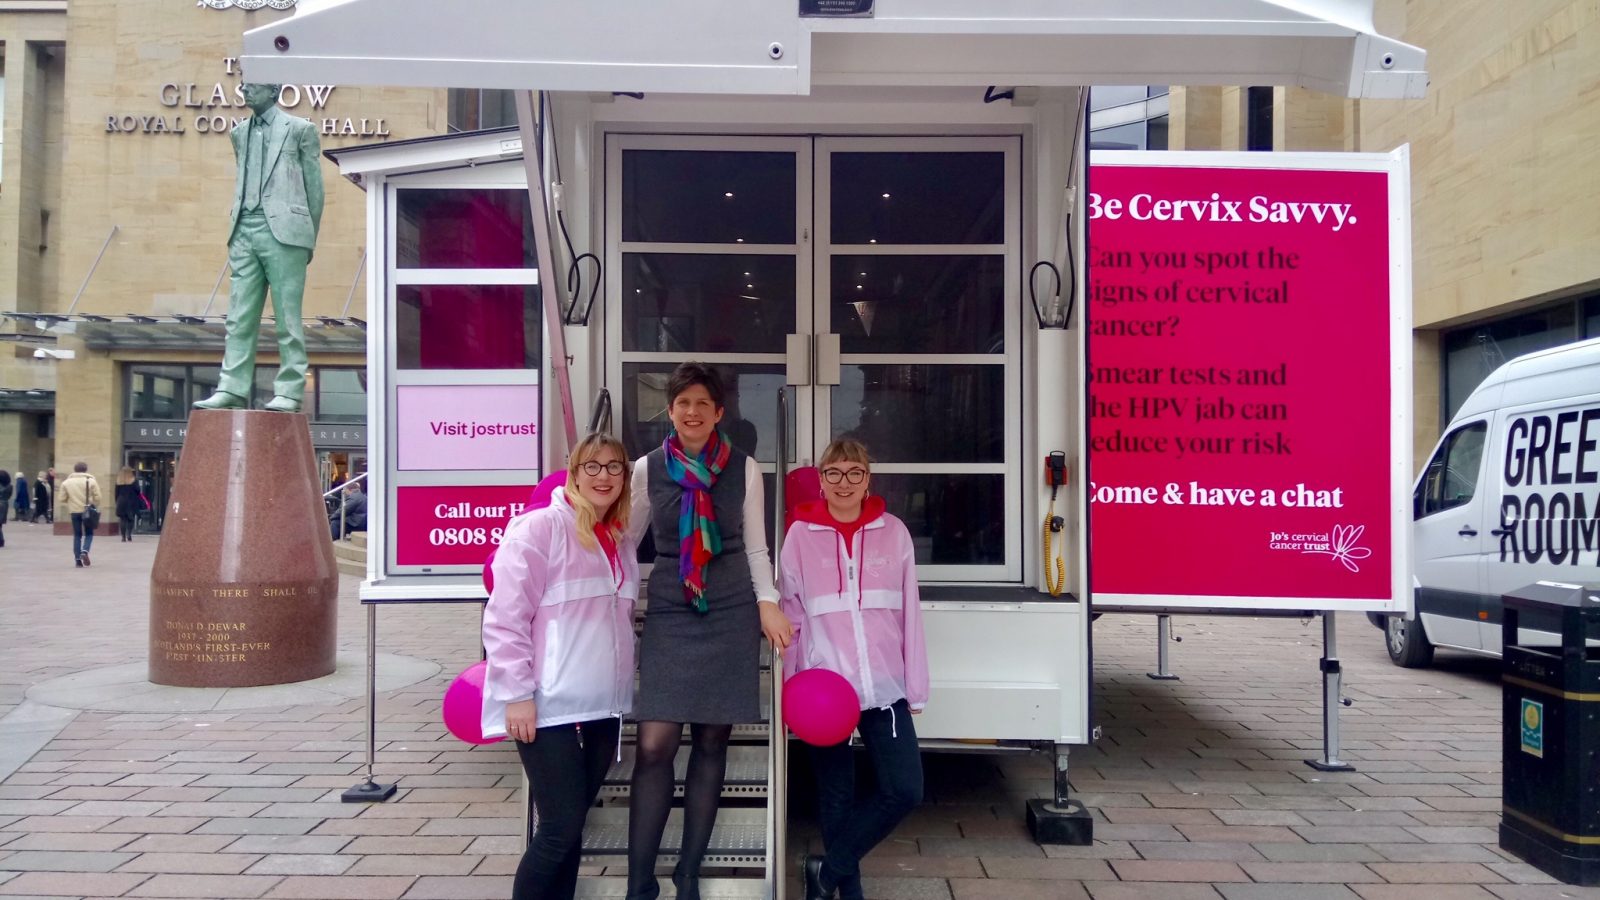 Alison Thewliss MP supports Be Cervix Savvy roadshow in Glasgow